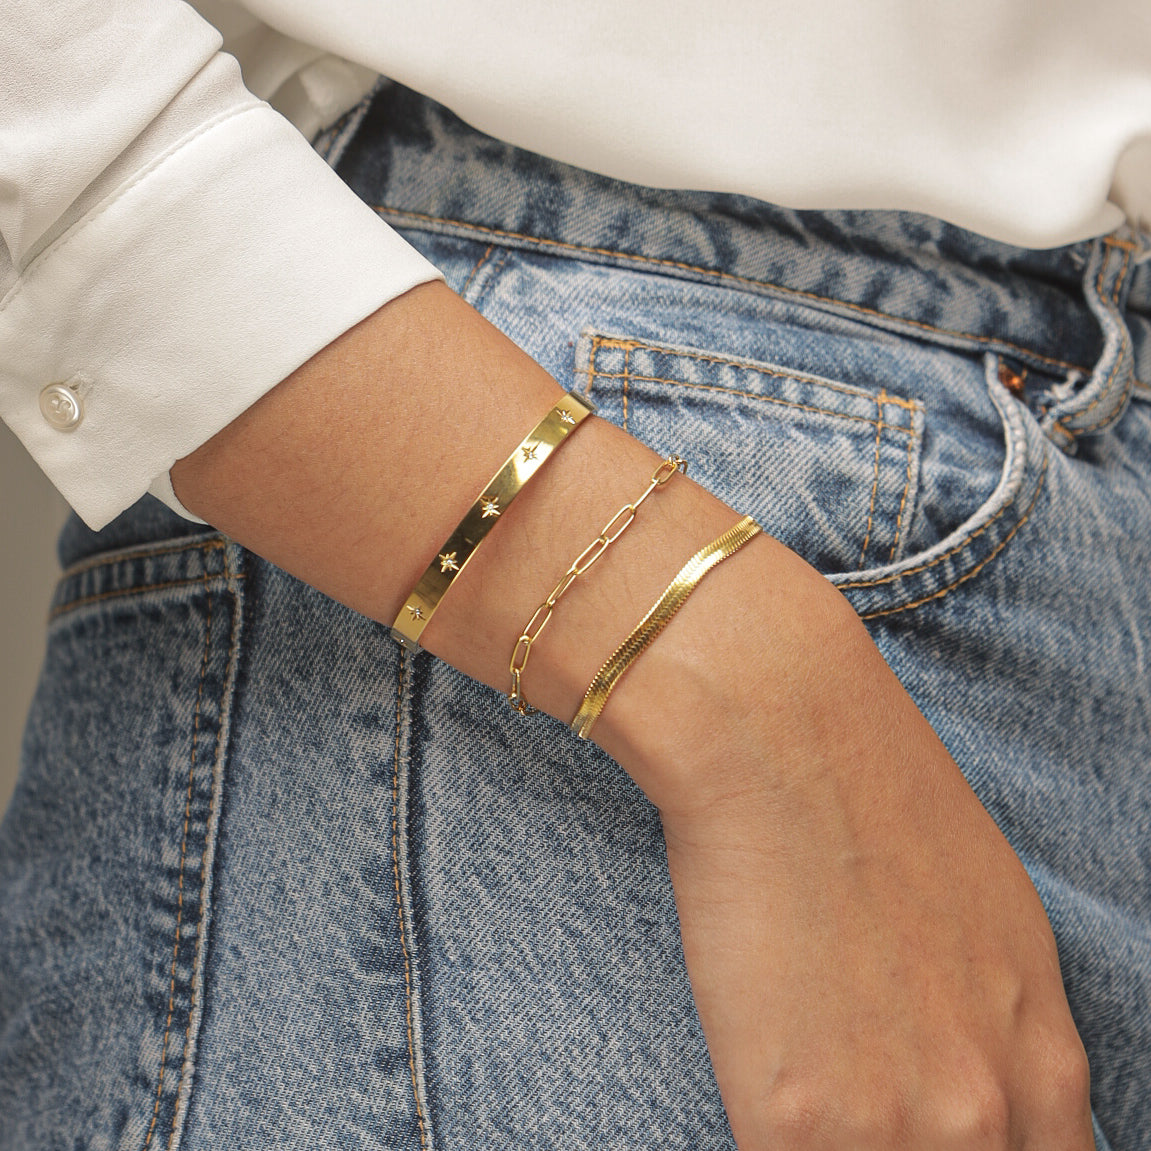 Stacked Cartier Love Bracelets - Isn't it Simply Gorgeous